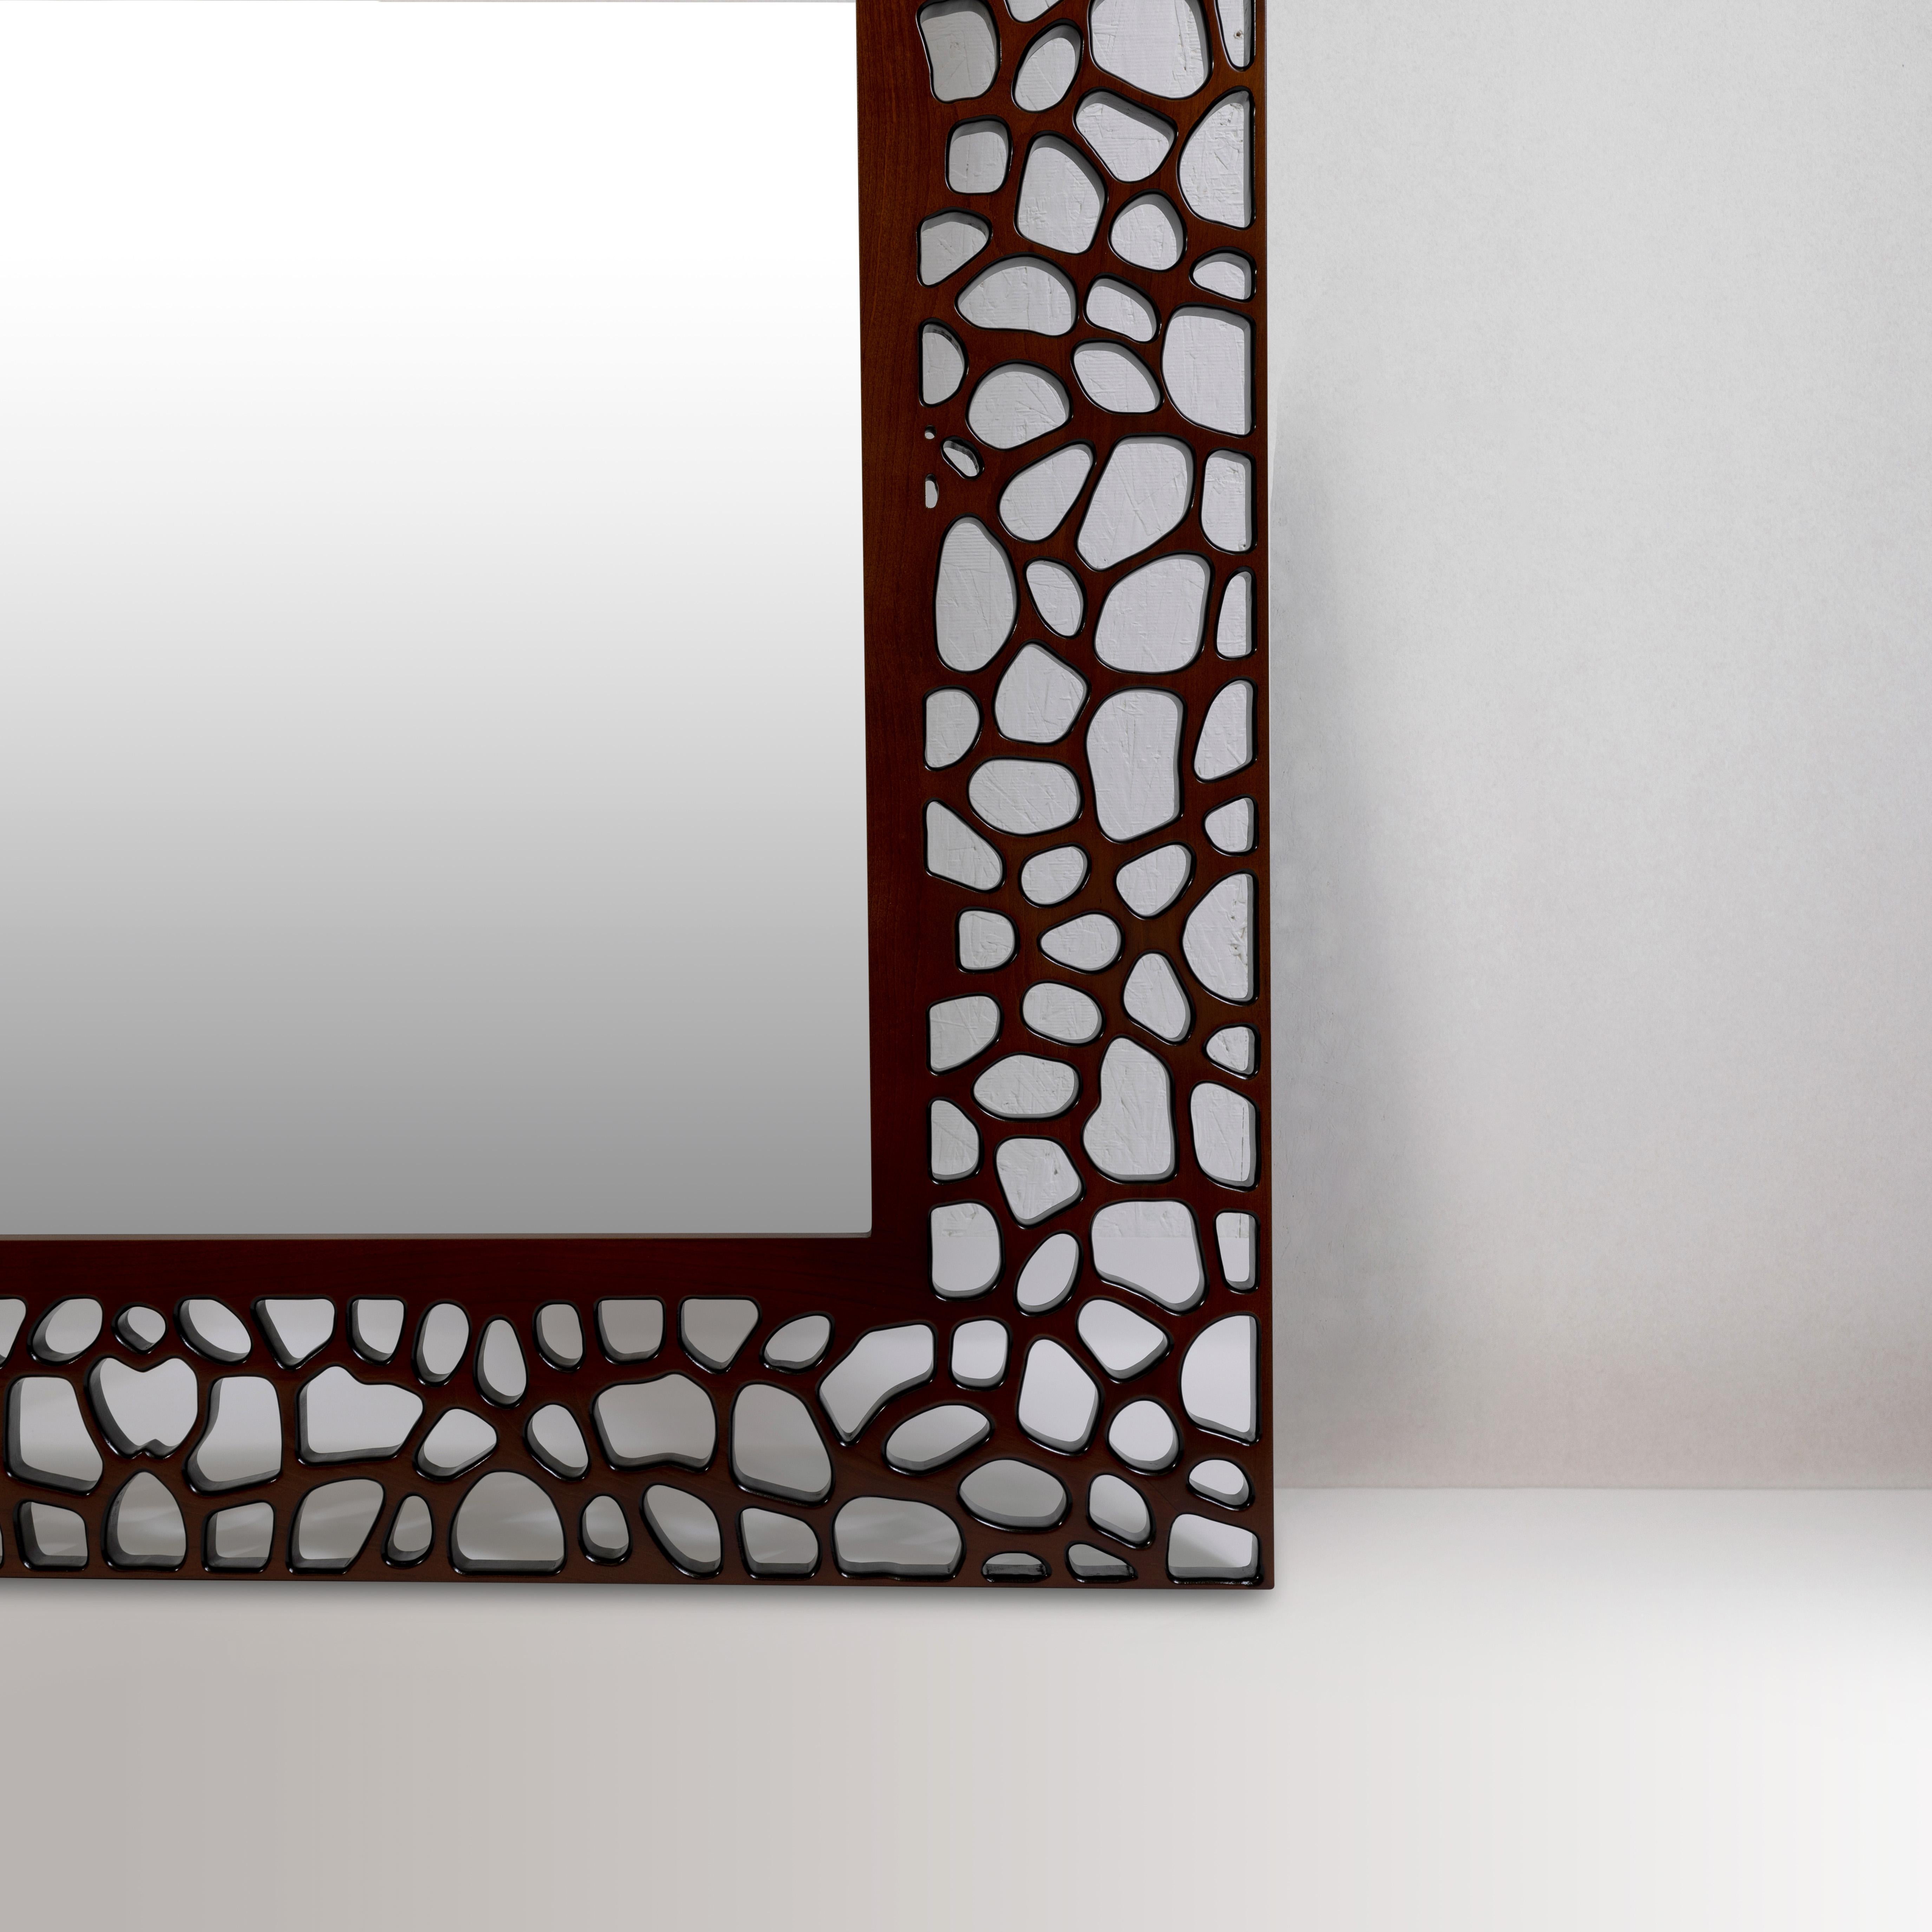 There isn’t a piece we have made that offers a more unique perspective than the Sahari Mirror. With unique carvings throughout the frame this mirror not only stands out as a statement piece but delivers intricacies throughout the design that will